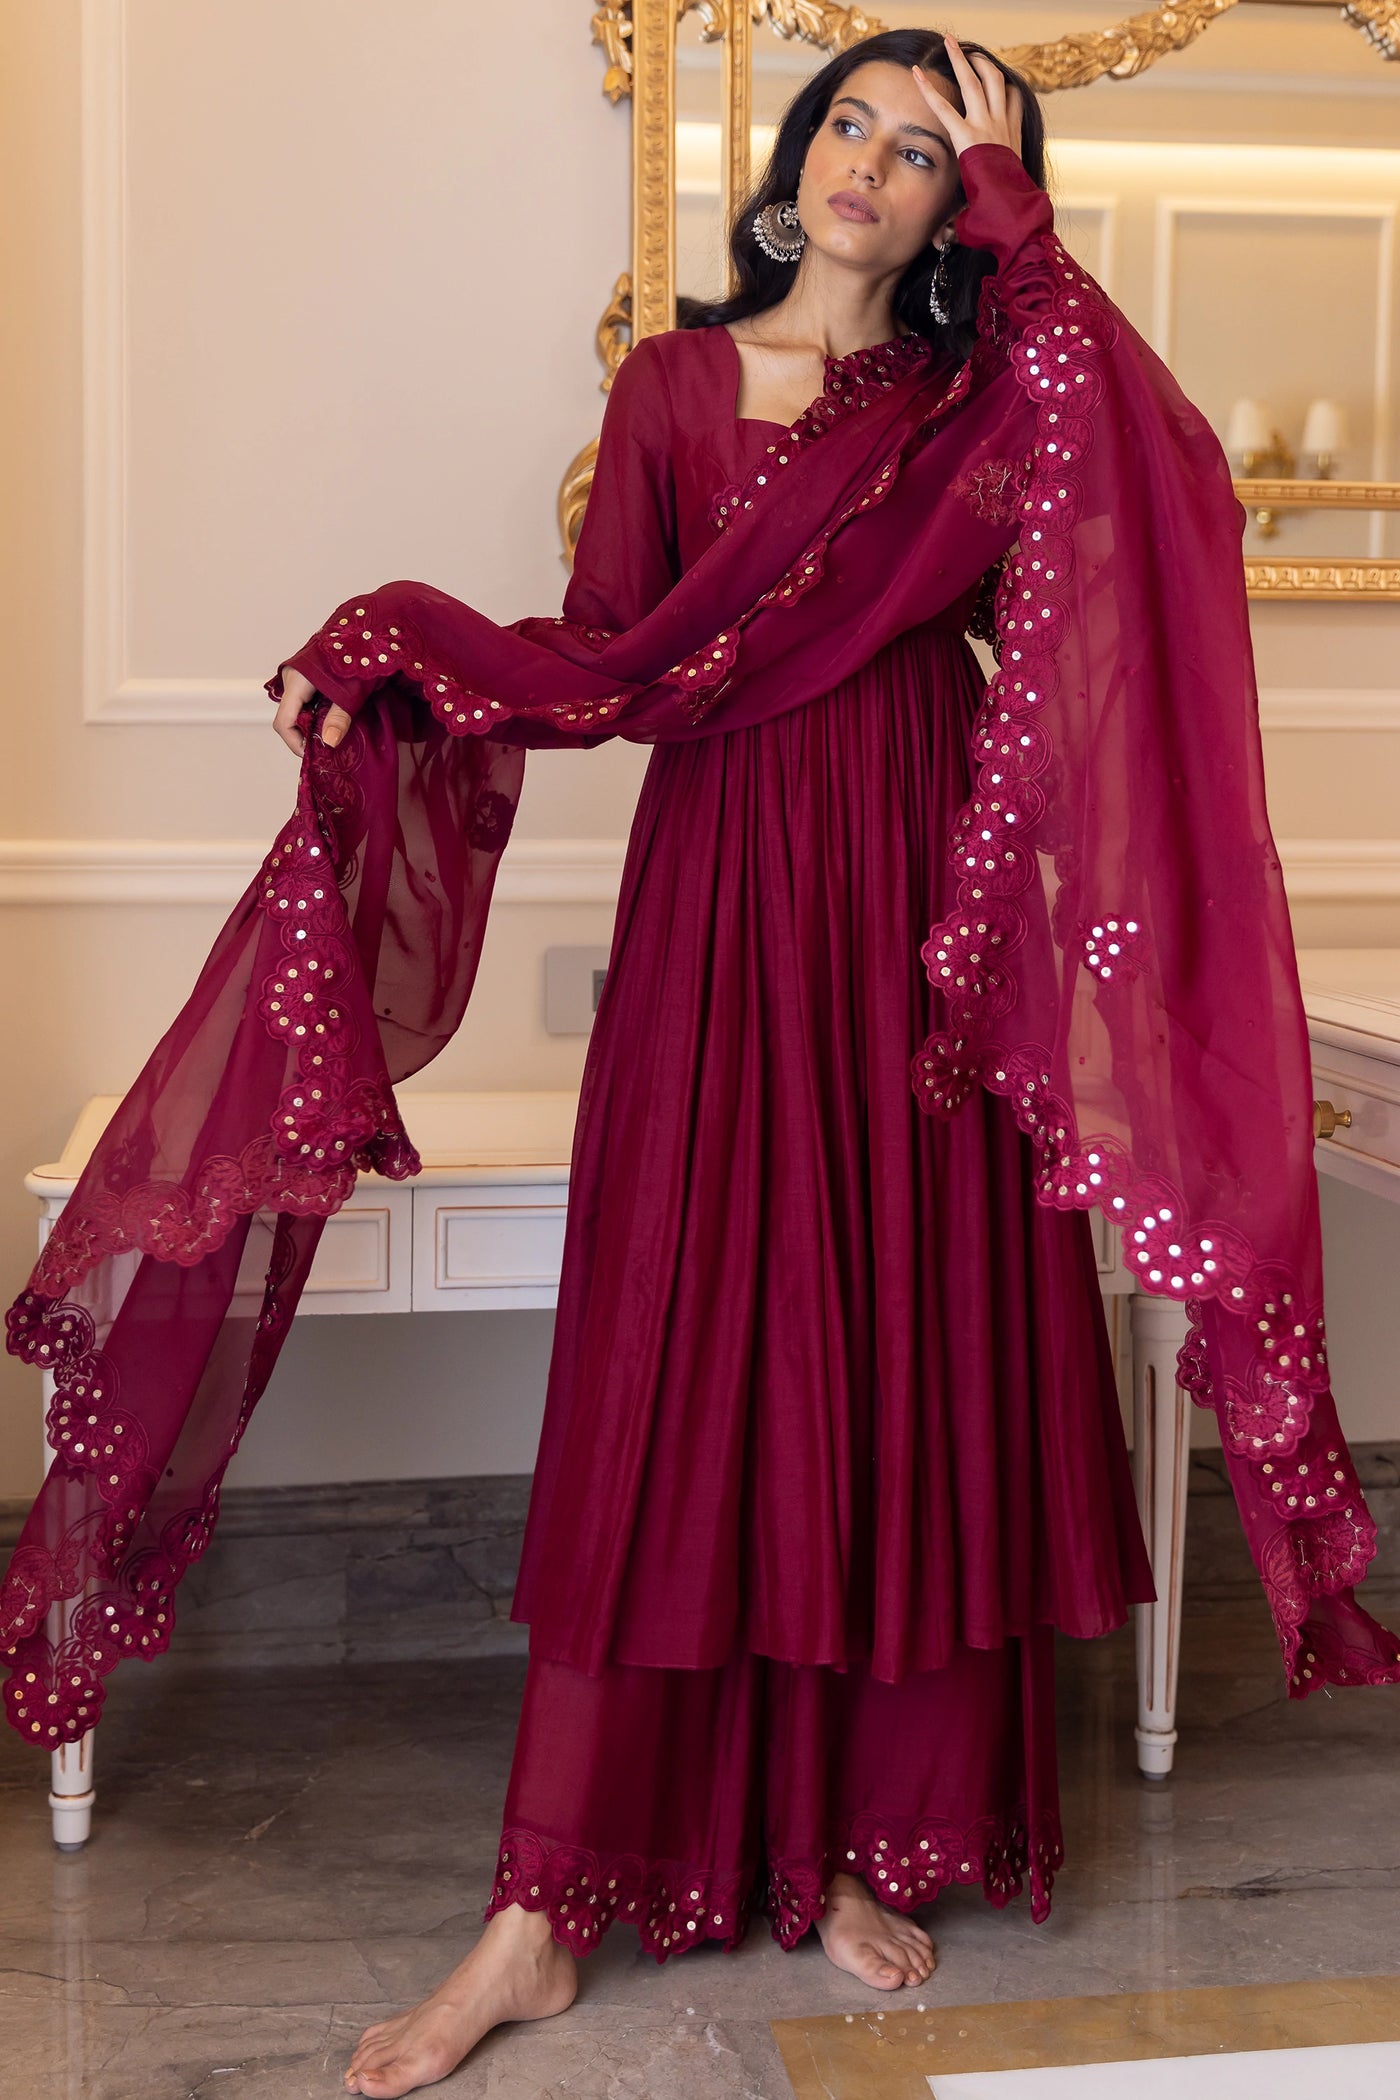 Wine Cotton Silk Anarkali Set Indian Clothing in Denver, CO, Aurora, CO, Boulder, CO, Fort Collins, CO, Colorado Springs, CO, Parker, CO, Highlands Ranch, CO, Cherry Creek, CO, Centennial, CO, and Longmont, CO. NATIONWIDE SHIPPING USA- India Fashion X